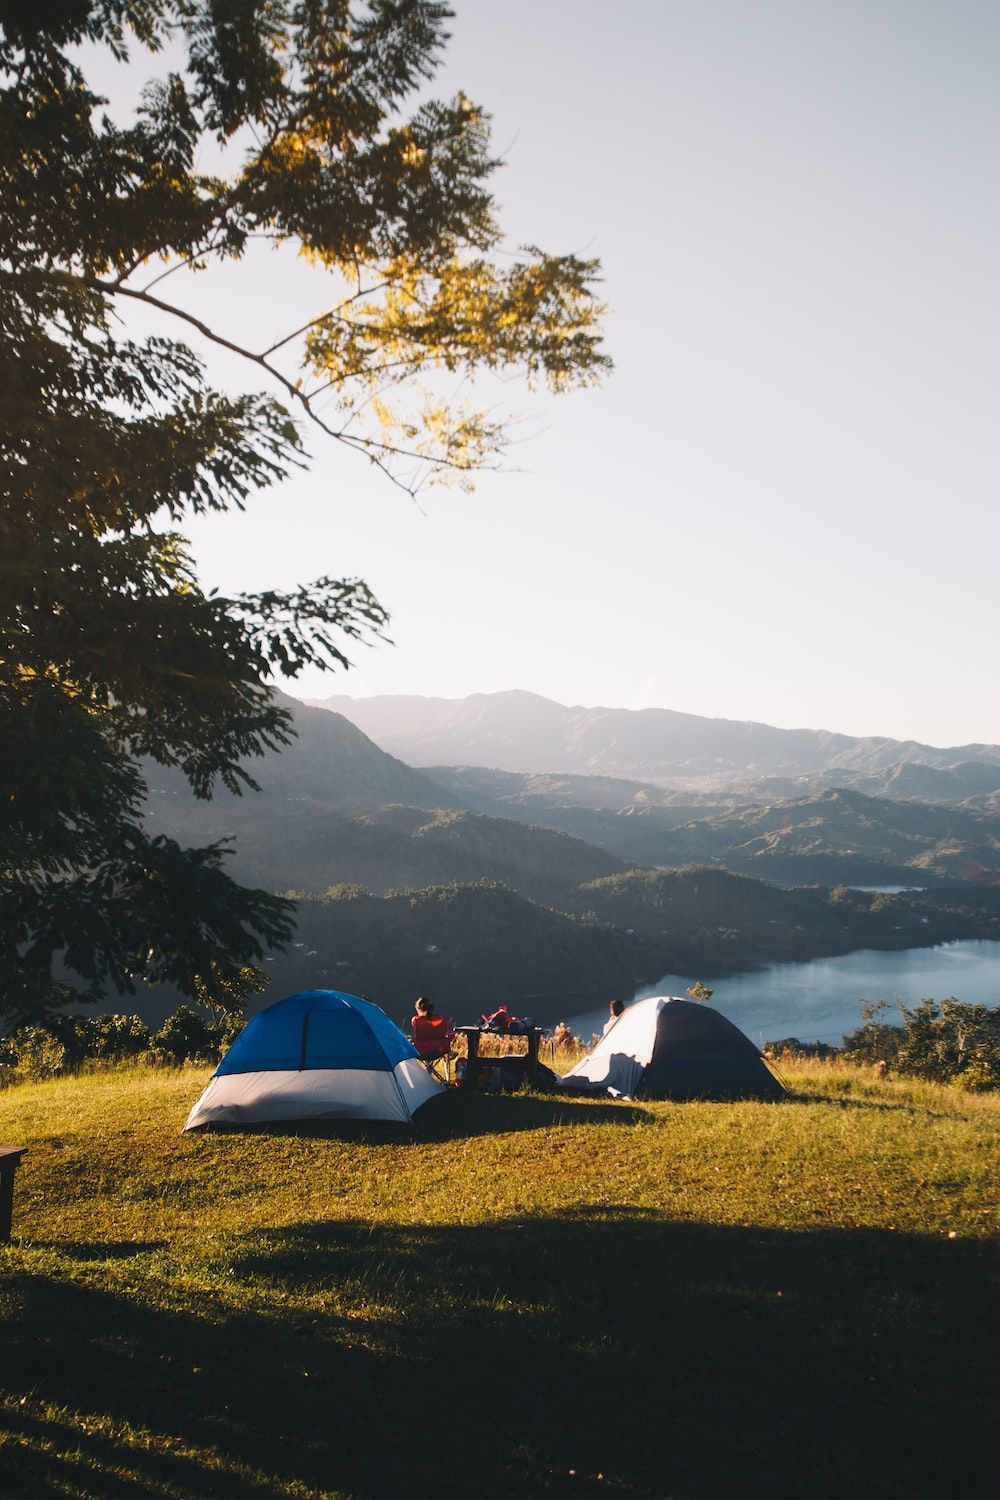 Two tents pitched on a hillside overlooking a lake - Camping